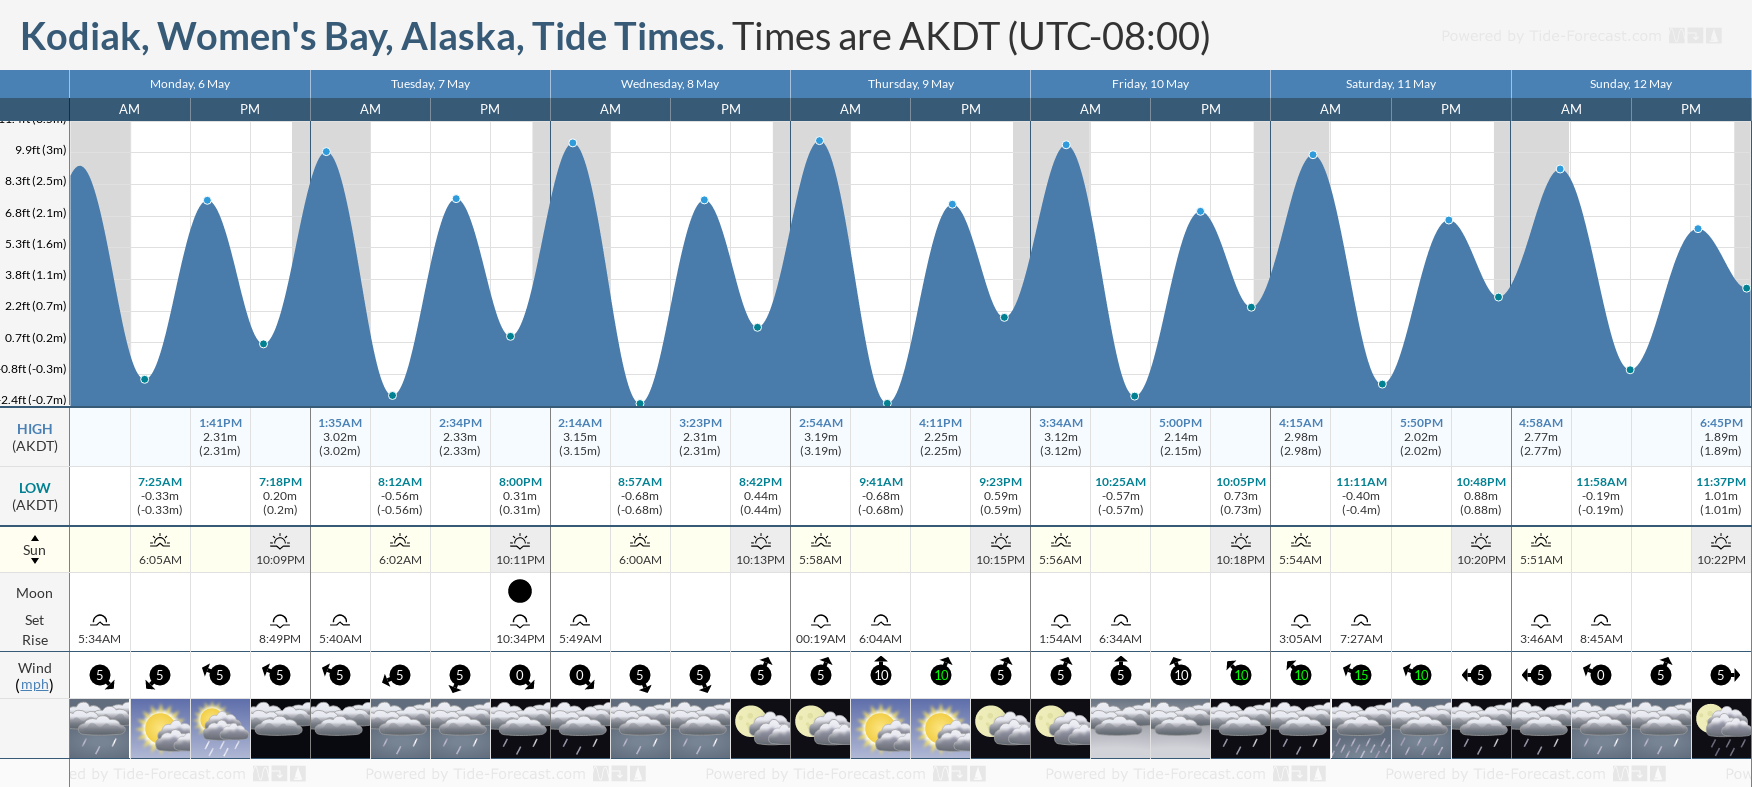 Kodiak, Women's Bay, Alaska Tide Chart including high and low tide times for the next 7 days